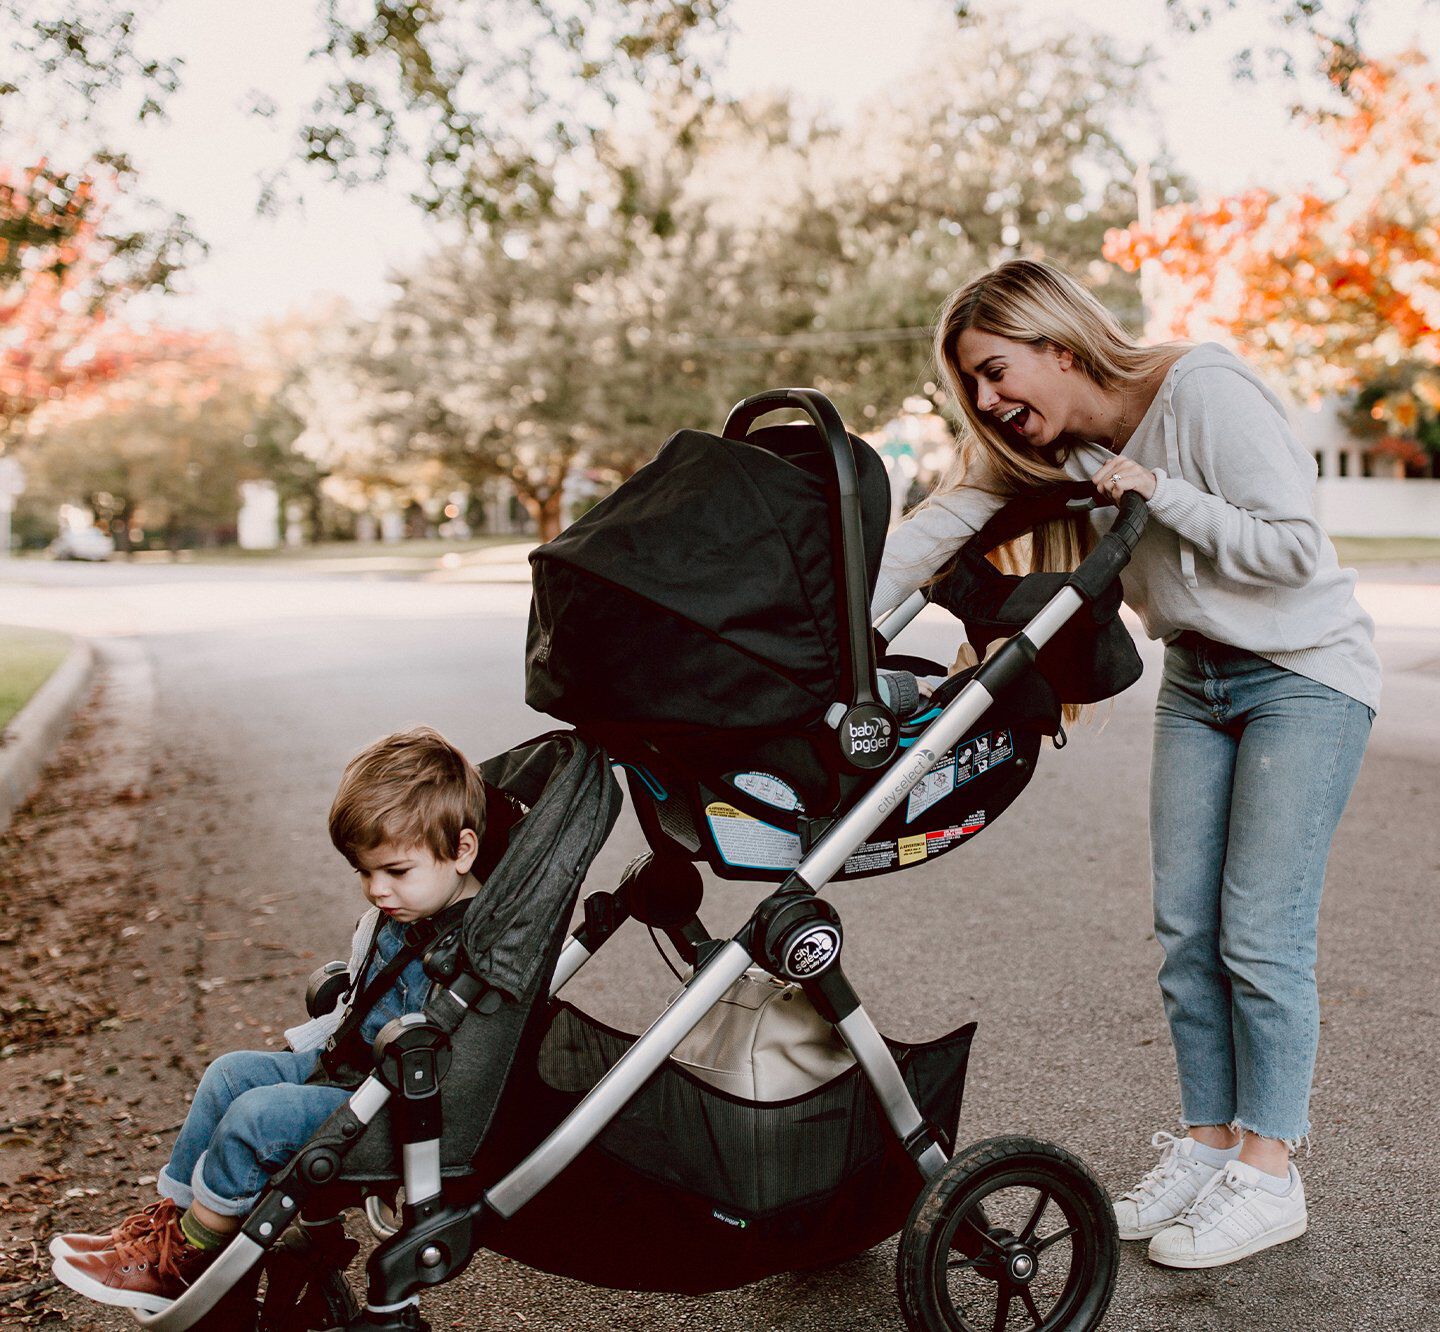 stroller that grows with child